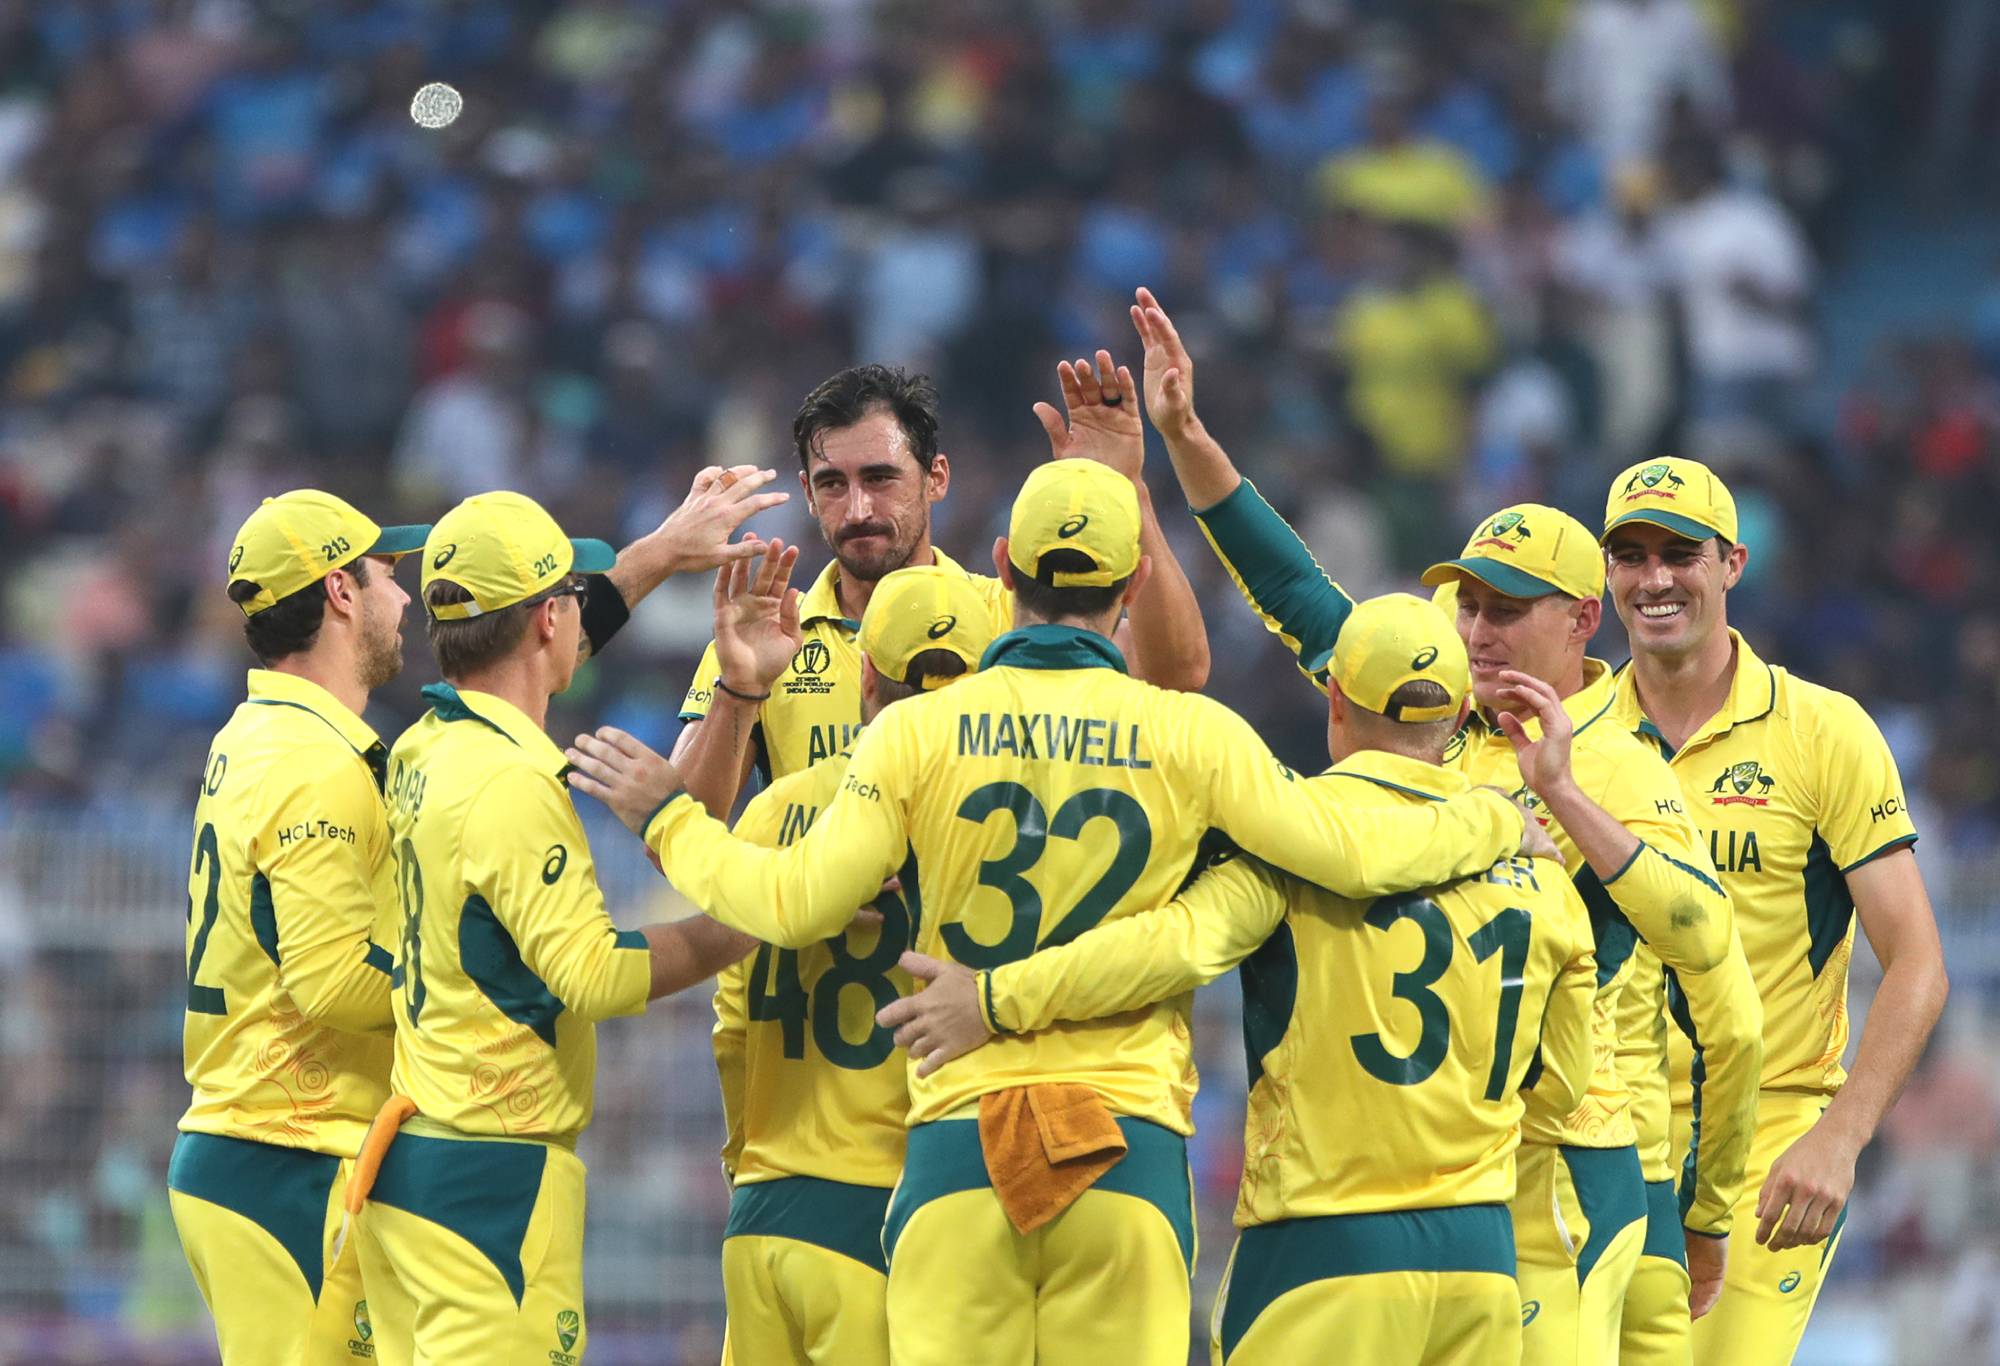 KOLKATA, INDIA - NOVEMBER 16: Australia's Mitchell Starc celebrates the wicket of Aiden Markram of South Africa during the ICC Men's Cricket World Cup 2023 semi final match between South Africa and Australia at Eden Gardens on November 16, 2023 in Kolkata, India. (Photo by Pankaj Nangia/Gallo Images/Getty Images)